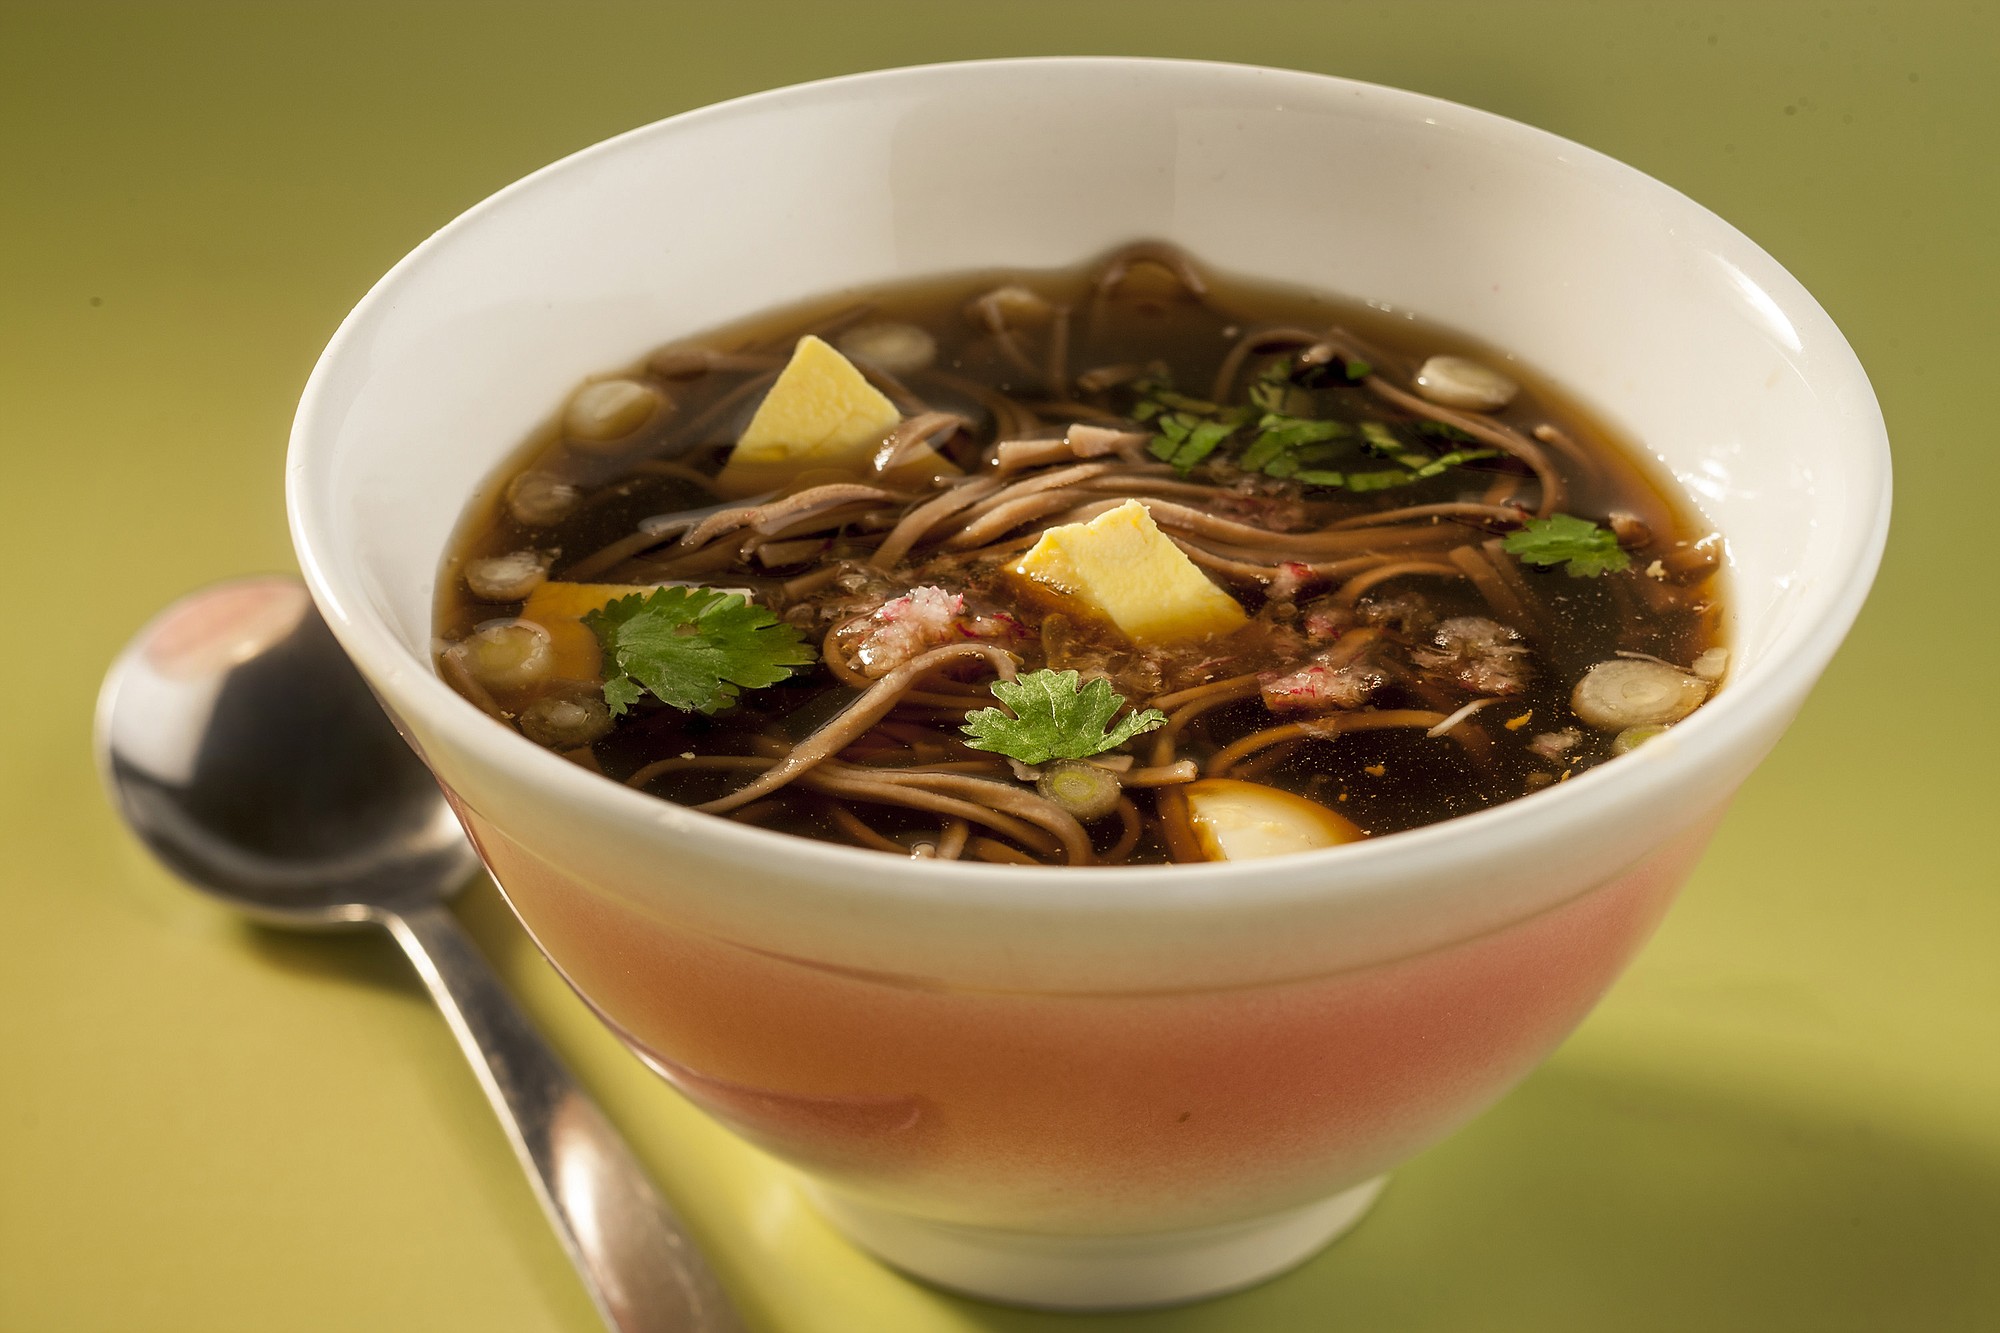 Tsuyu is a simple soup of dashi, mirin and soy sauce.